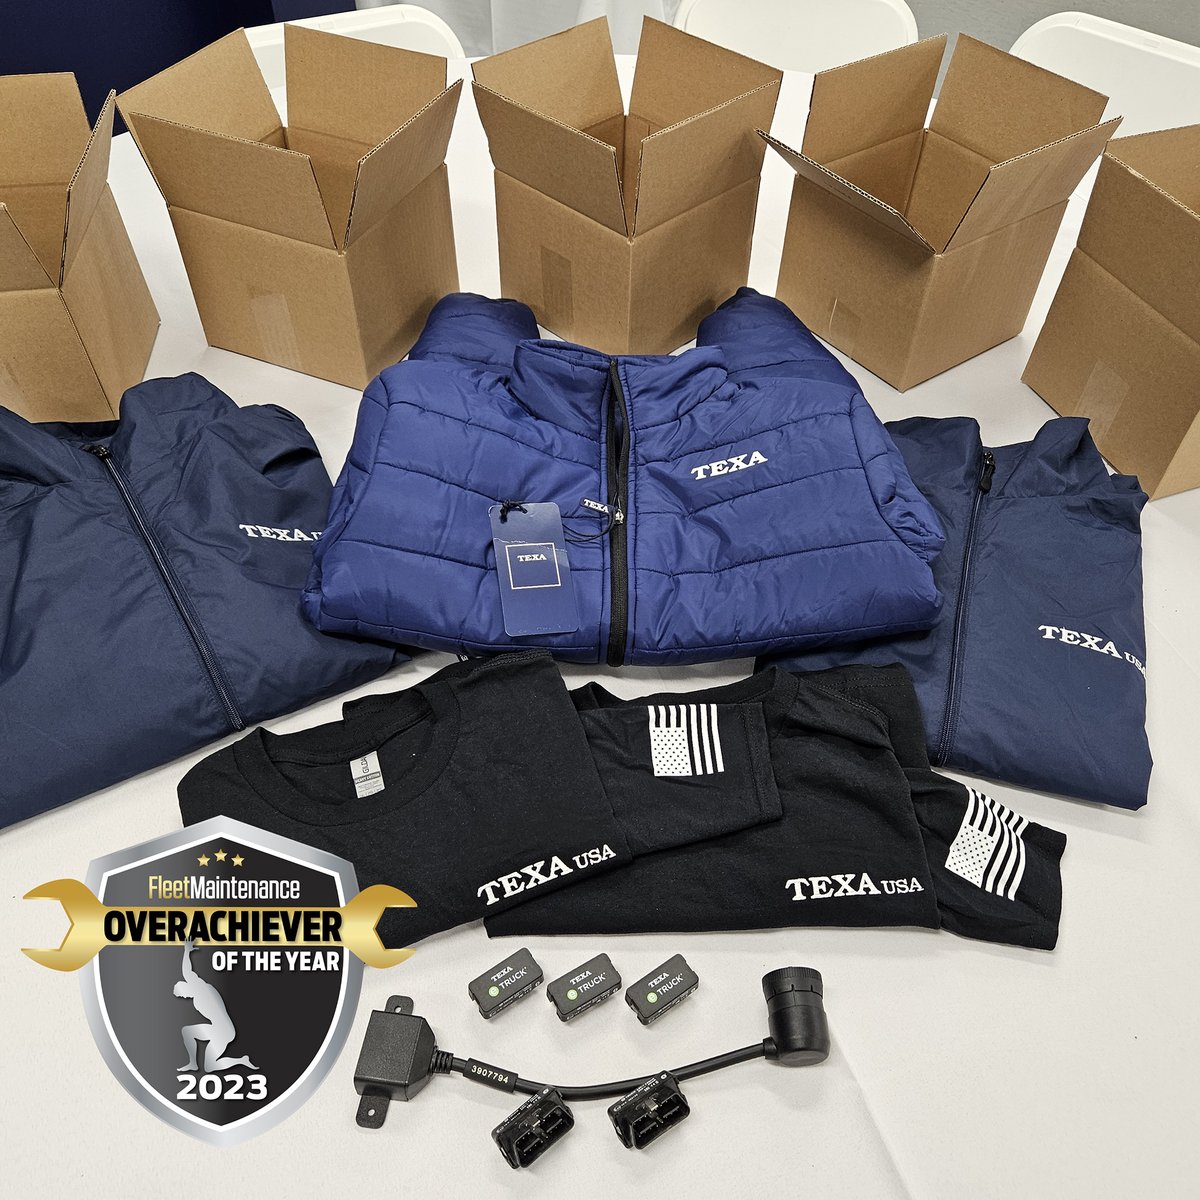 Thank you @FleetMaintenance Magazine for announcing the 2023 Overachiever awards sponsored by TEXA USA. The 6 winners are receiving TEXA eTRUCK units along with some TEXA USA swag!
#OverachieverAward #FleetMaintenance #PTENMagazine
Professional Tool & Equipment News Magazine